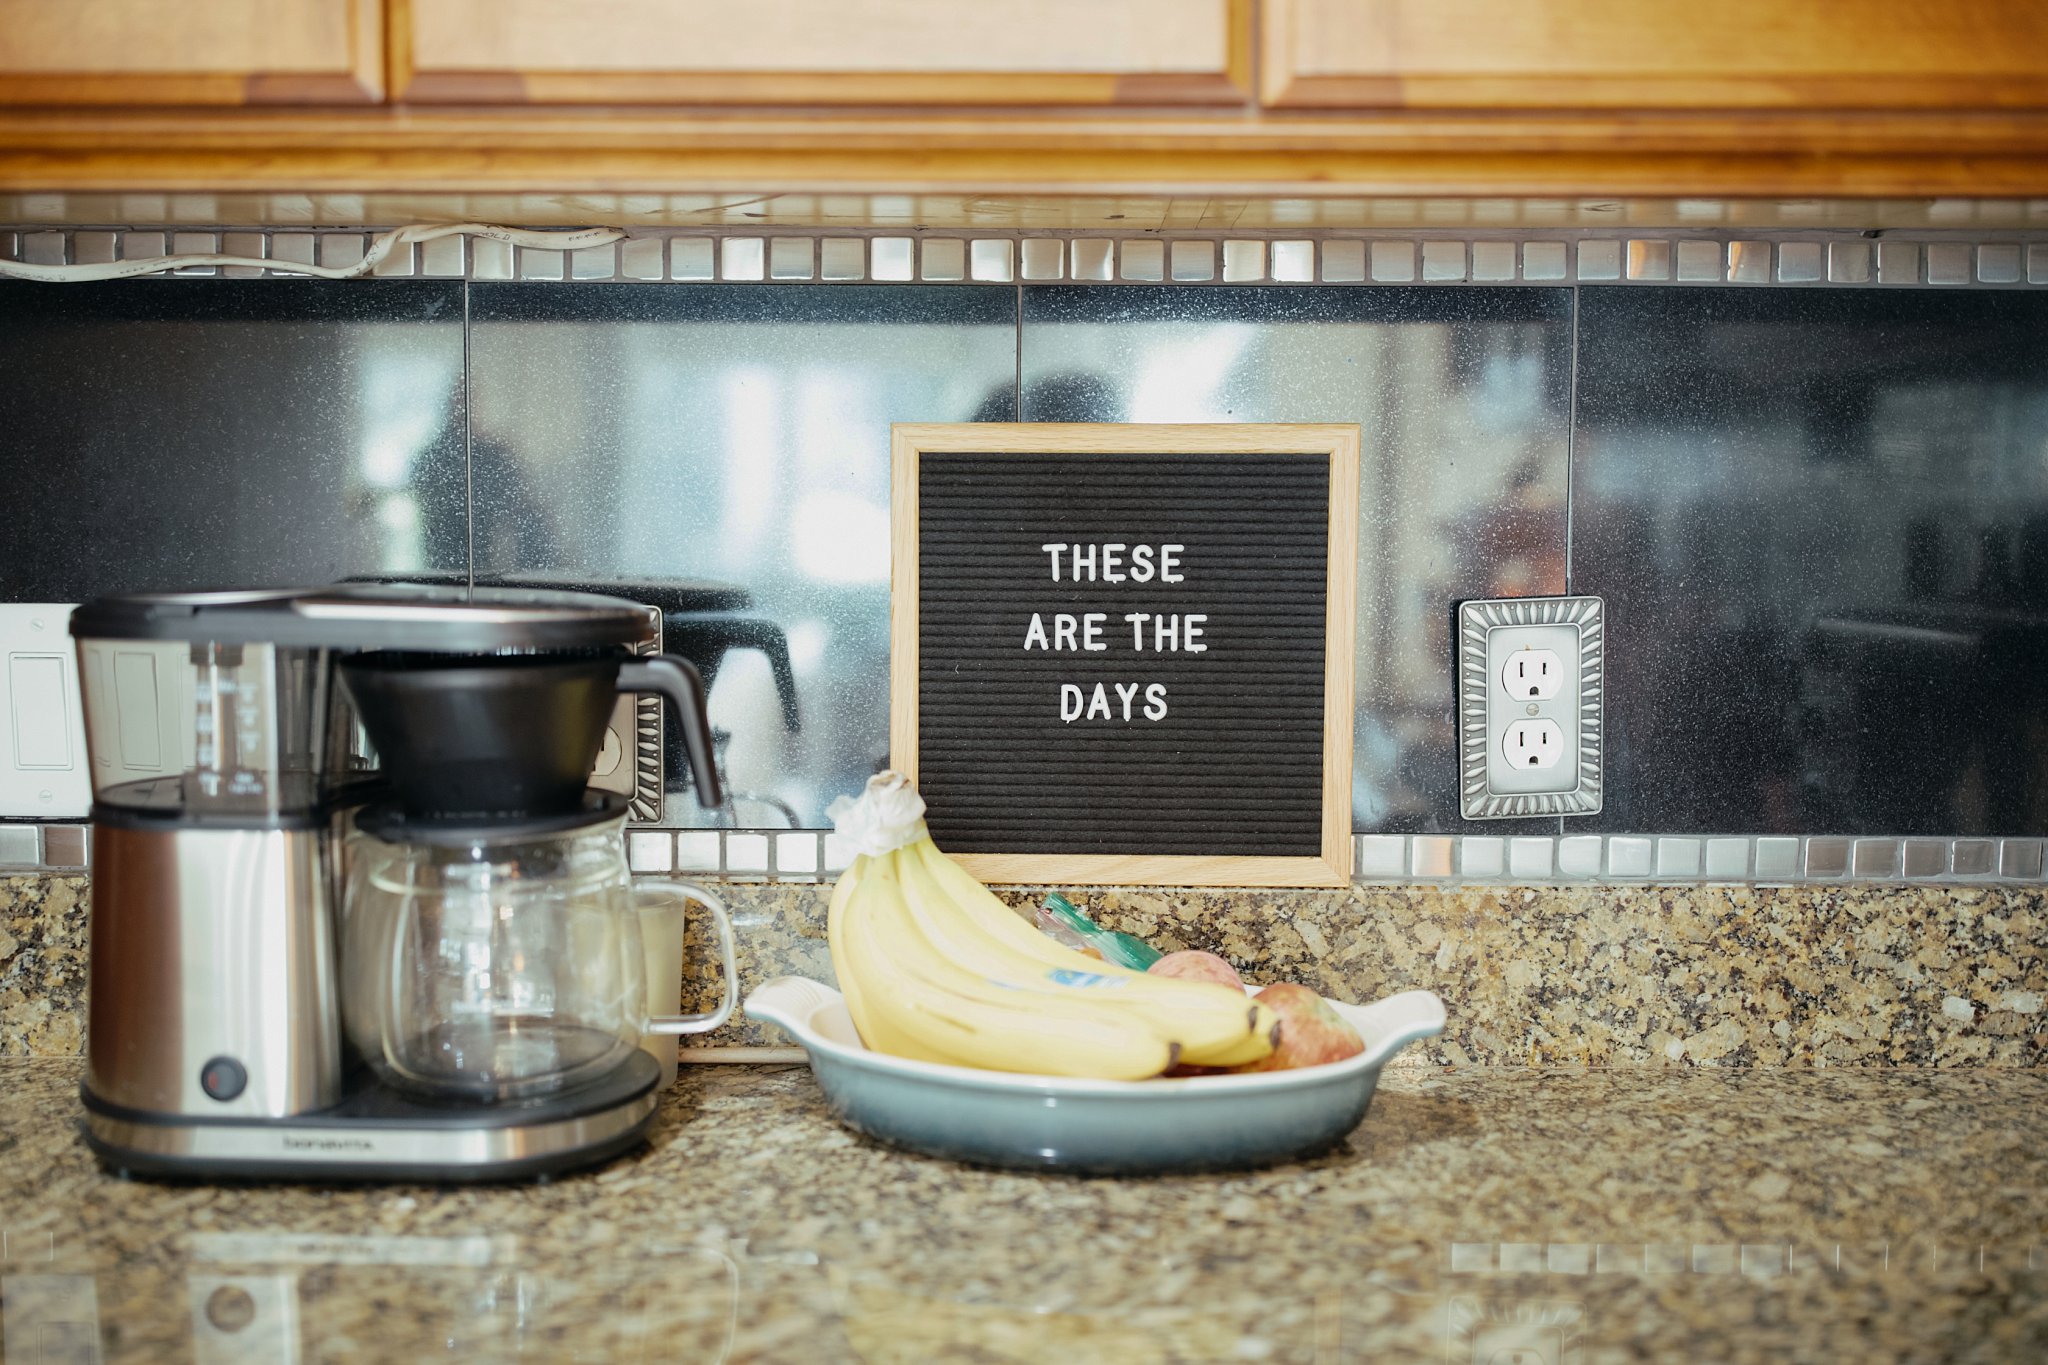 These are the days sign in kitchen